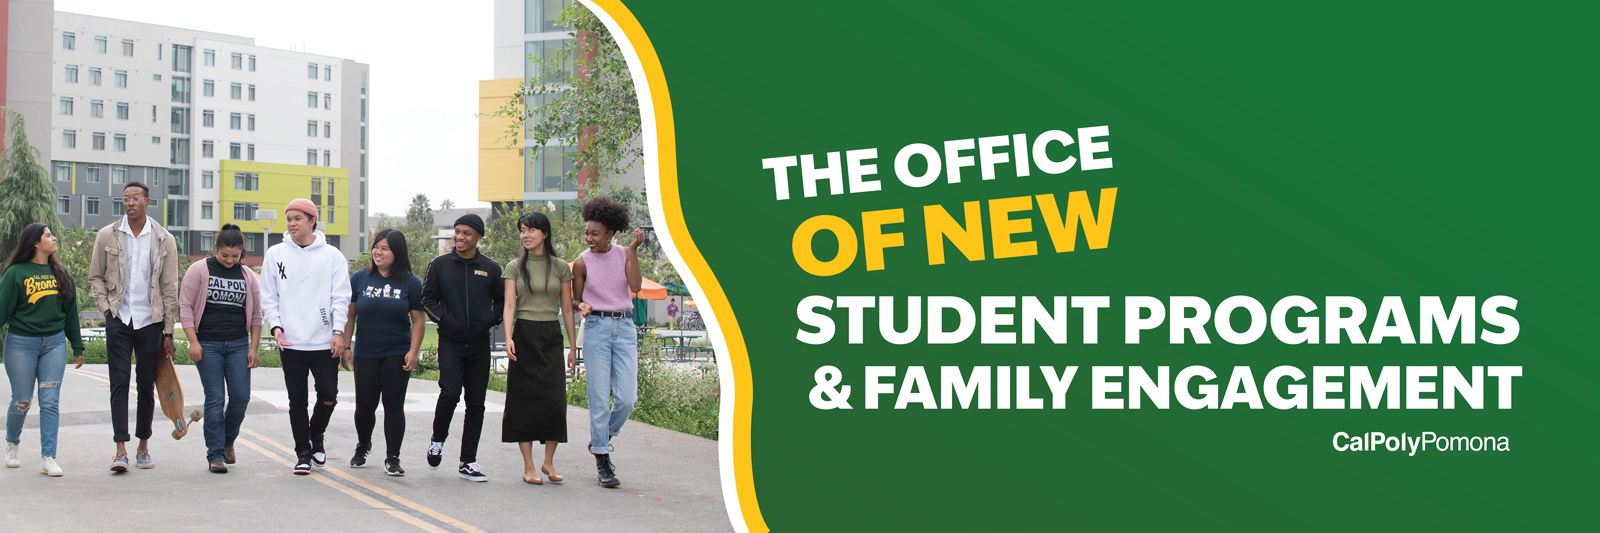 Office of New Student Programs & Family Engagement